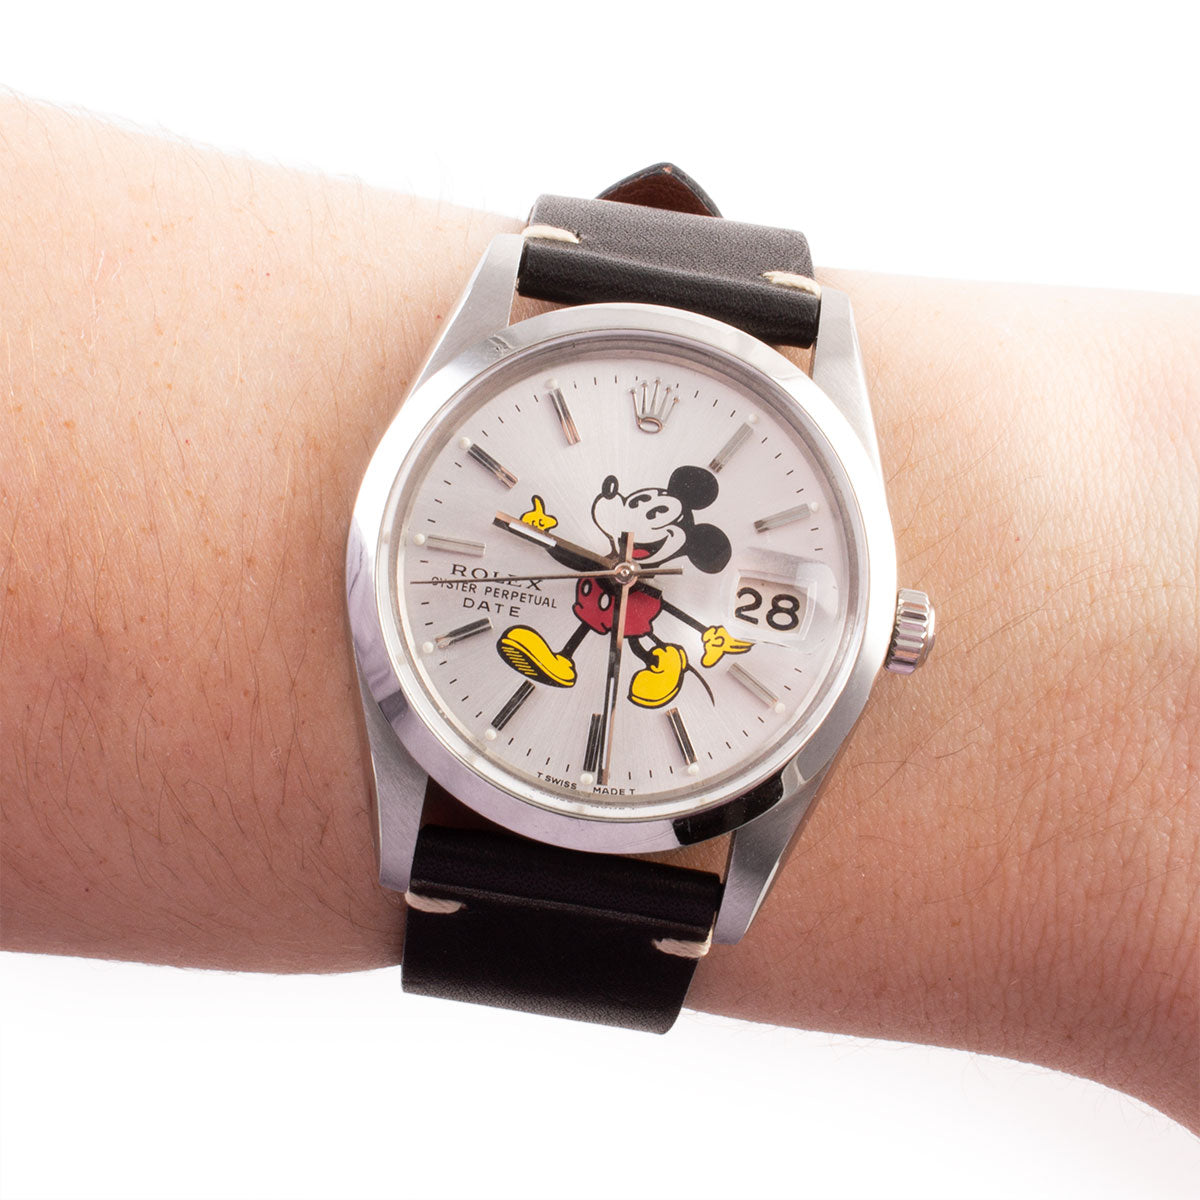 Second-hand watch - Rolex - Oyster Perpetual Date "Mickey" - 4250€